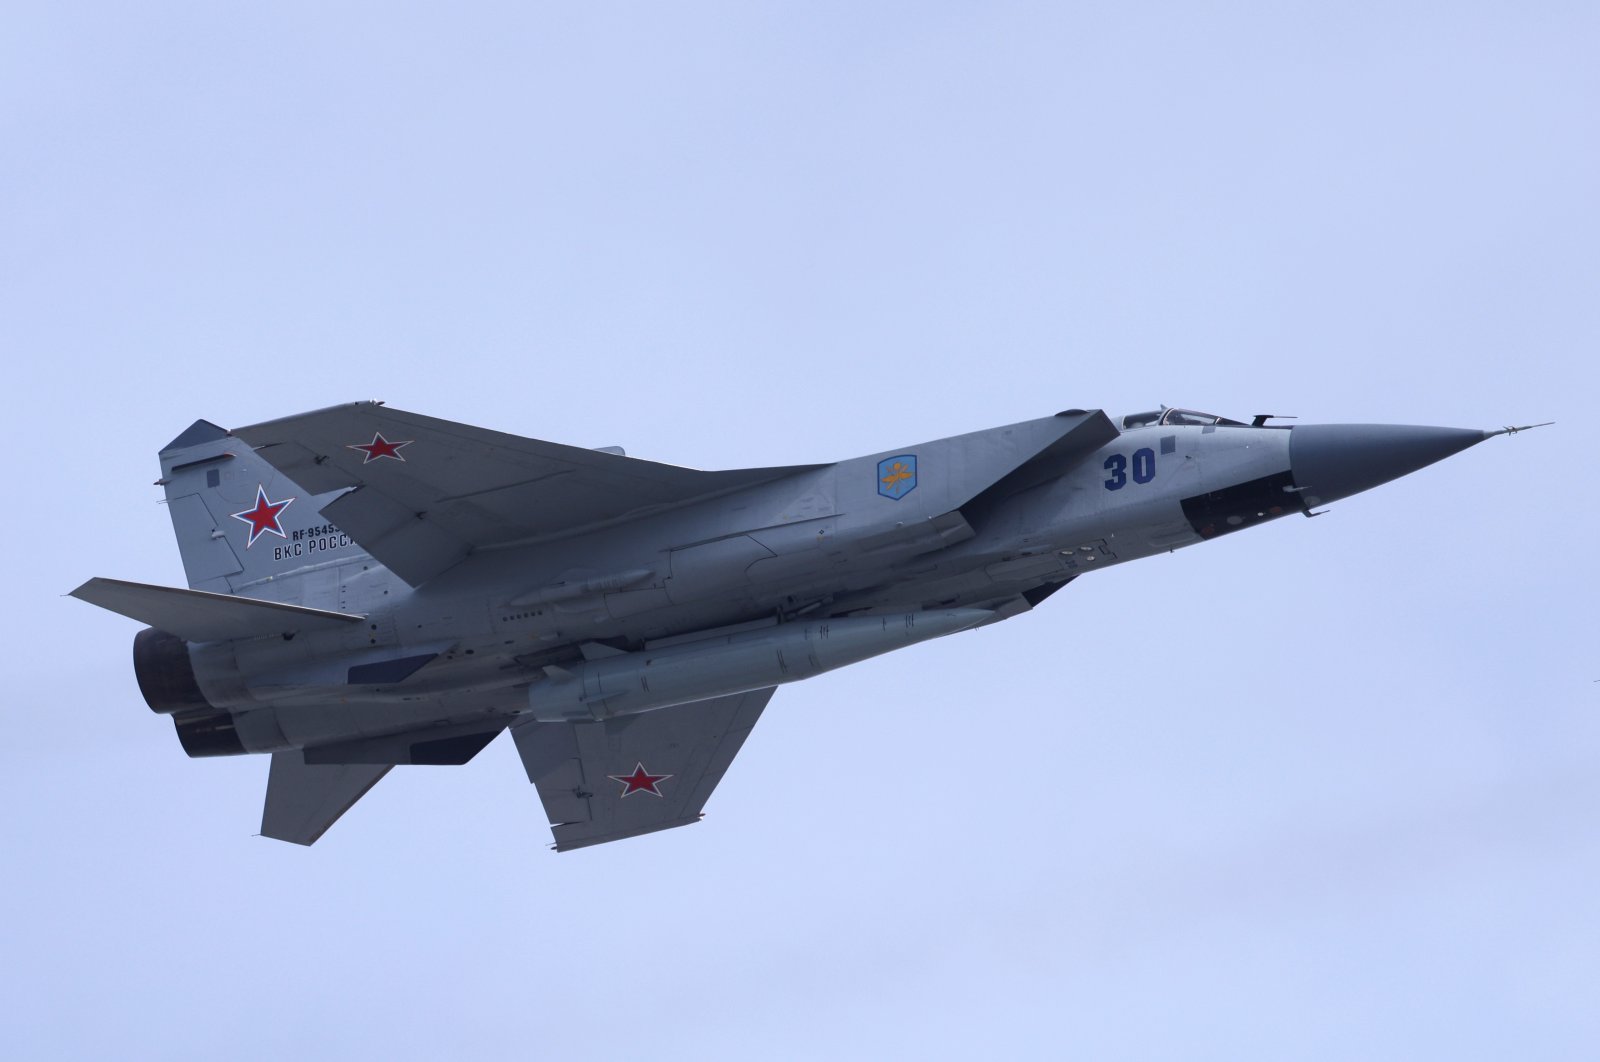 A Russian MiG-31 fighter jet equipped with a Kinzhal hypersonic missile flies over Red Square during a rehearsal for a flypast, part of a military parade marking the anniversary of the victory over Nazi Germany in World War Two, in central Moscow, Russia May 7, 2022. (Reuters File Photo)